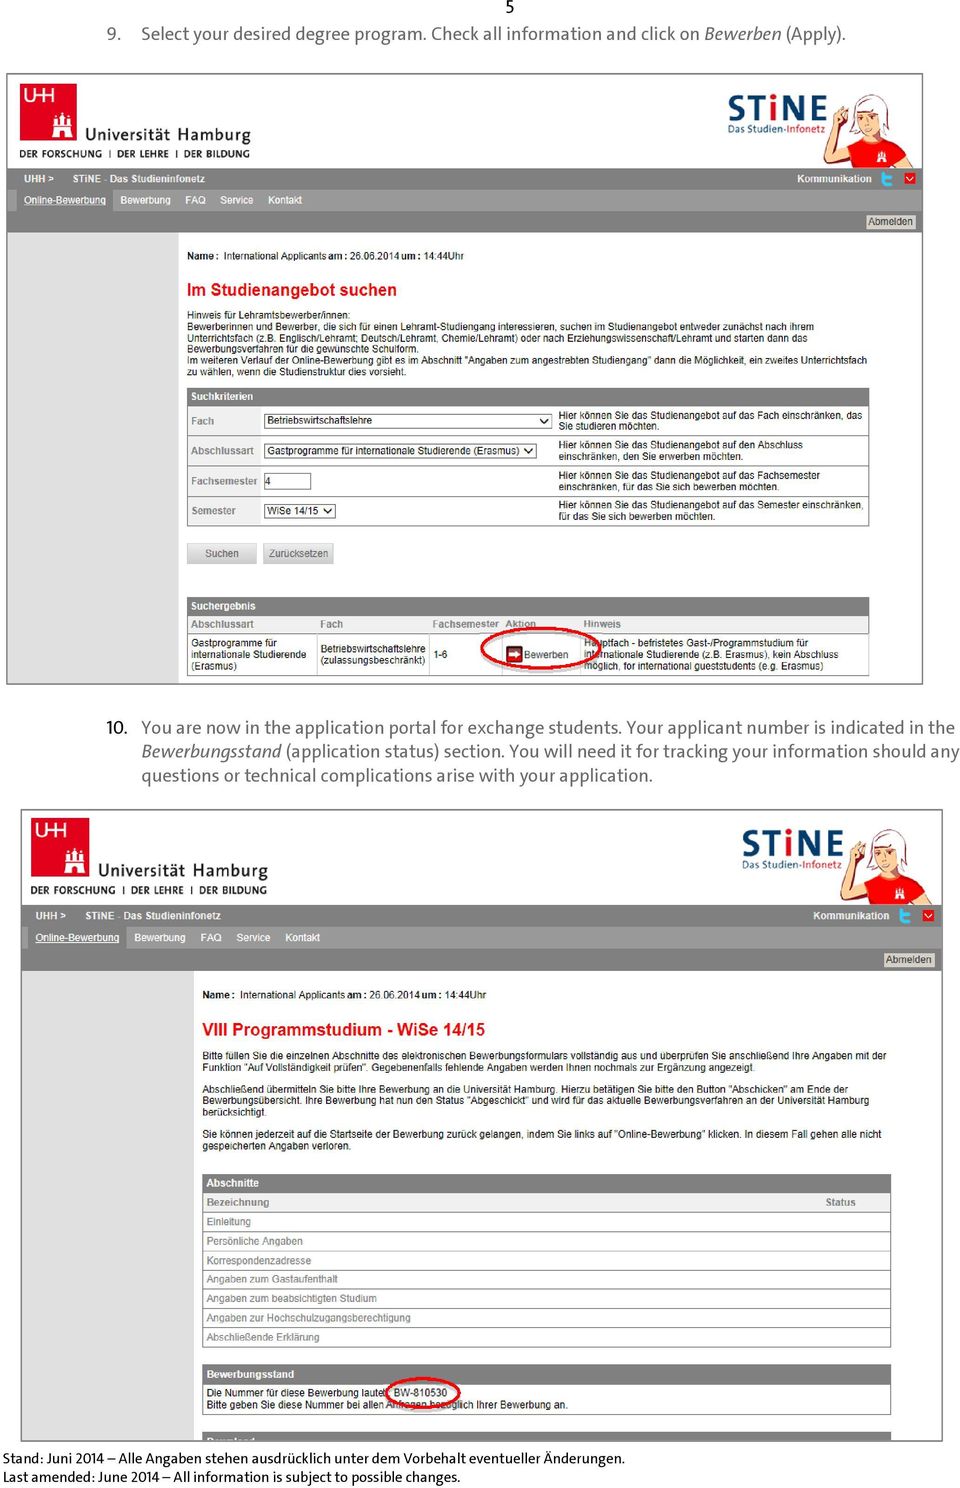 Your applicant number is indicated in the Bewerbungsstand (application status) section.